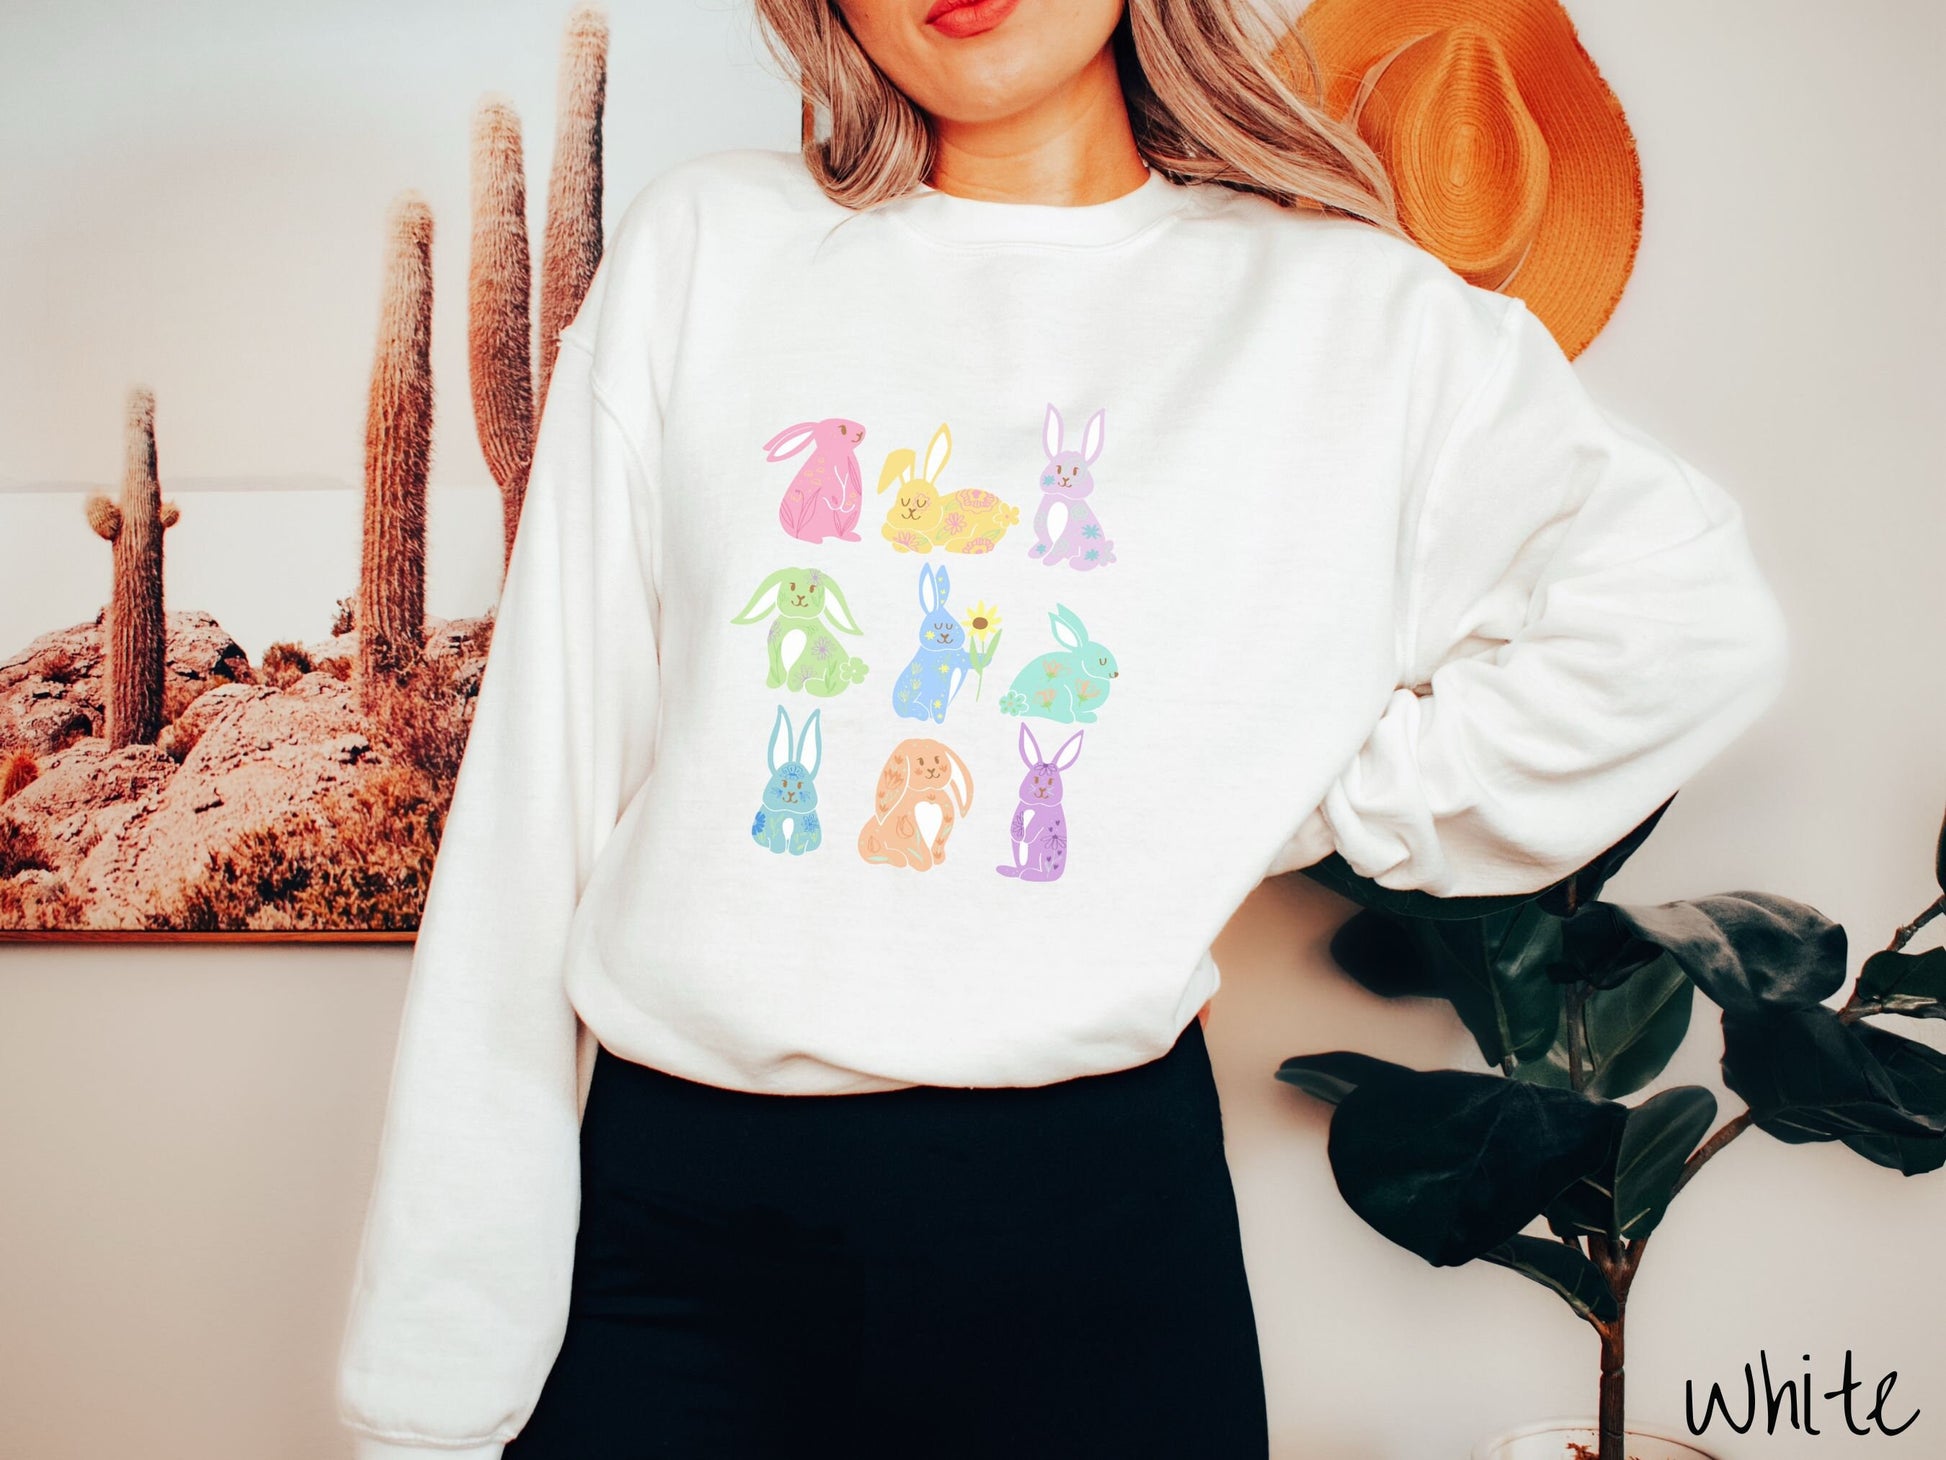 A woman wearing a cute, vintage white colored sweatshirt with a three by three grid of colorful bunny rabbits. They are from left to right pink, yellow, purple, green, blue, seafoam, light blue, orange, and purple with flowers near them.